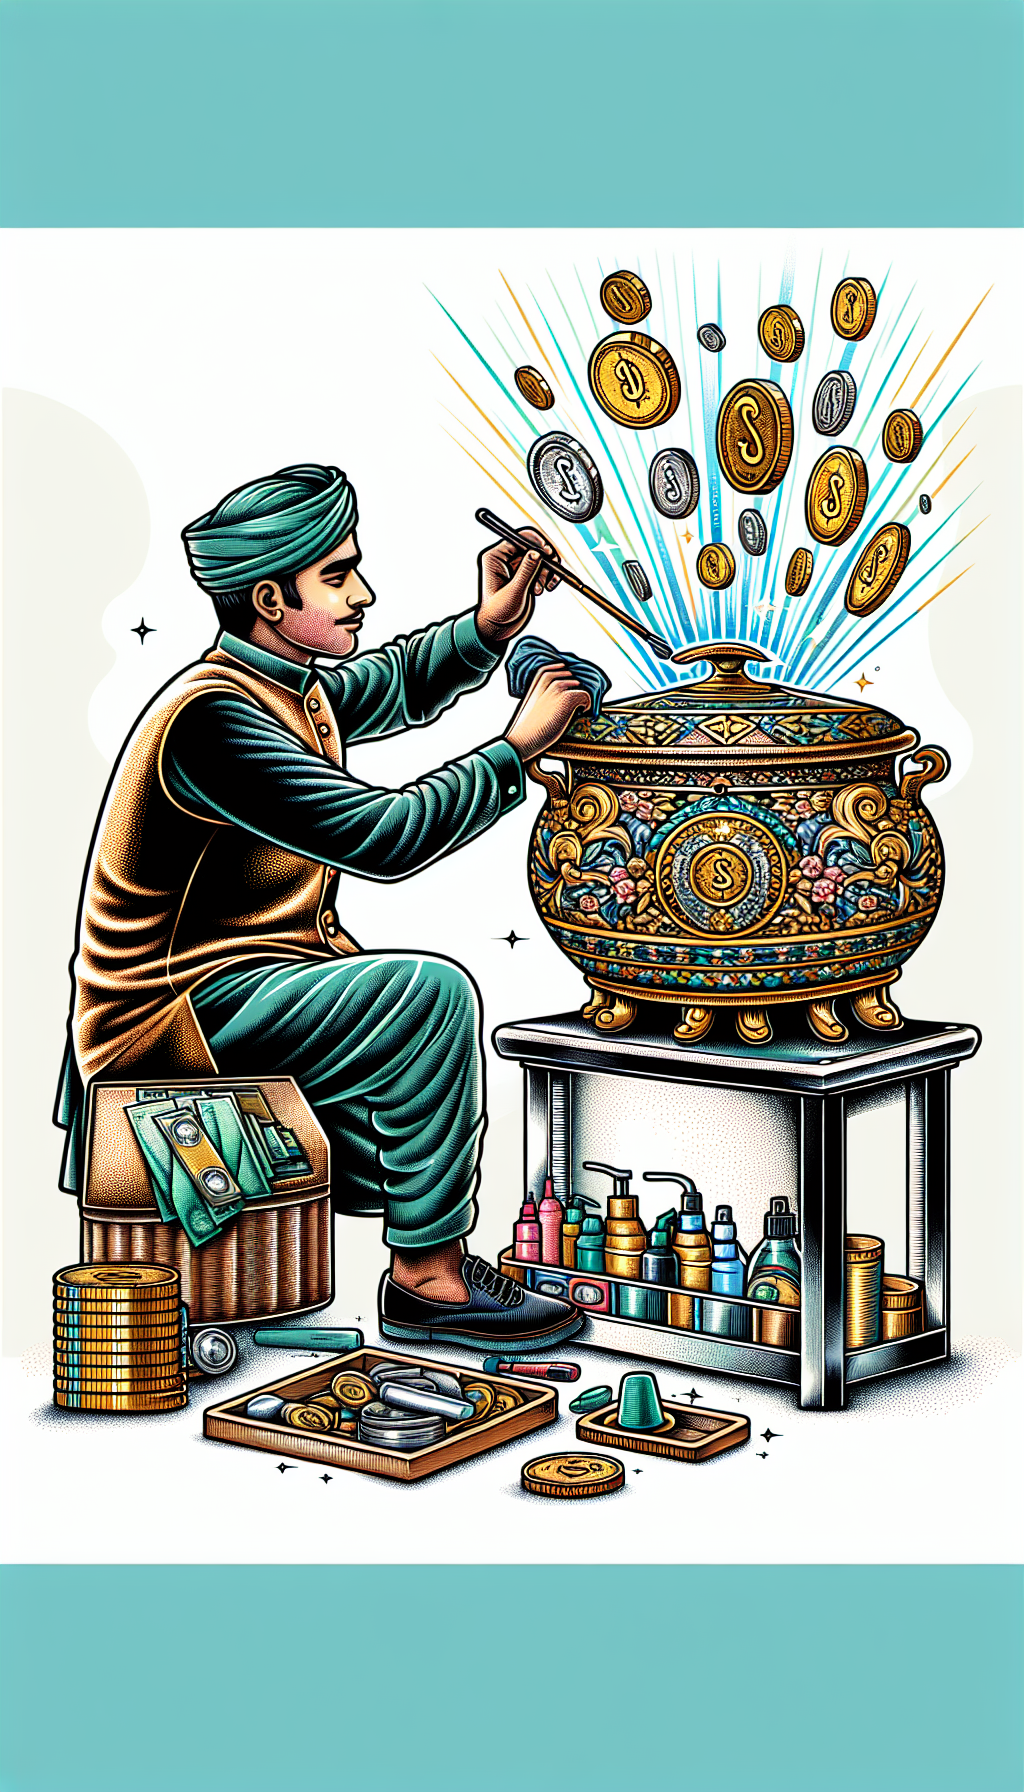 An illustration showcasing a person in vintage attire polishing an ornate antique cooler, with gleaming coins and dollar bills floating upward to represent increased value. The cooler sits on a pedestal, half restored to highlight before/after contrast, with tools and preservation products arrayed neatly beside it. The image blends art nouveau outlines with a modern, vibrant color palette to convey timeless value.